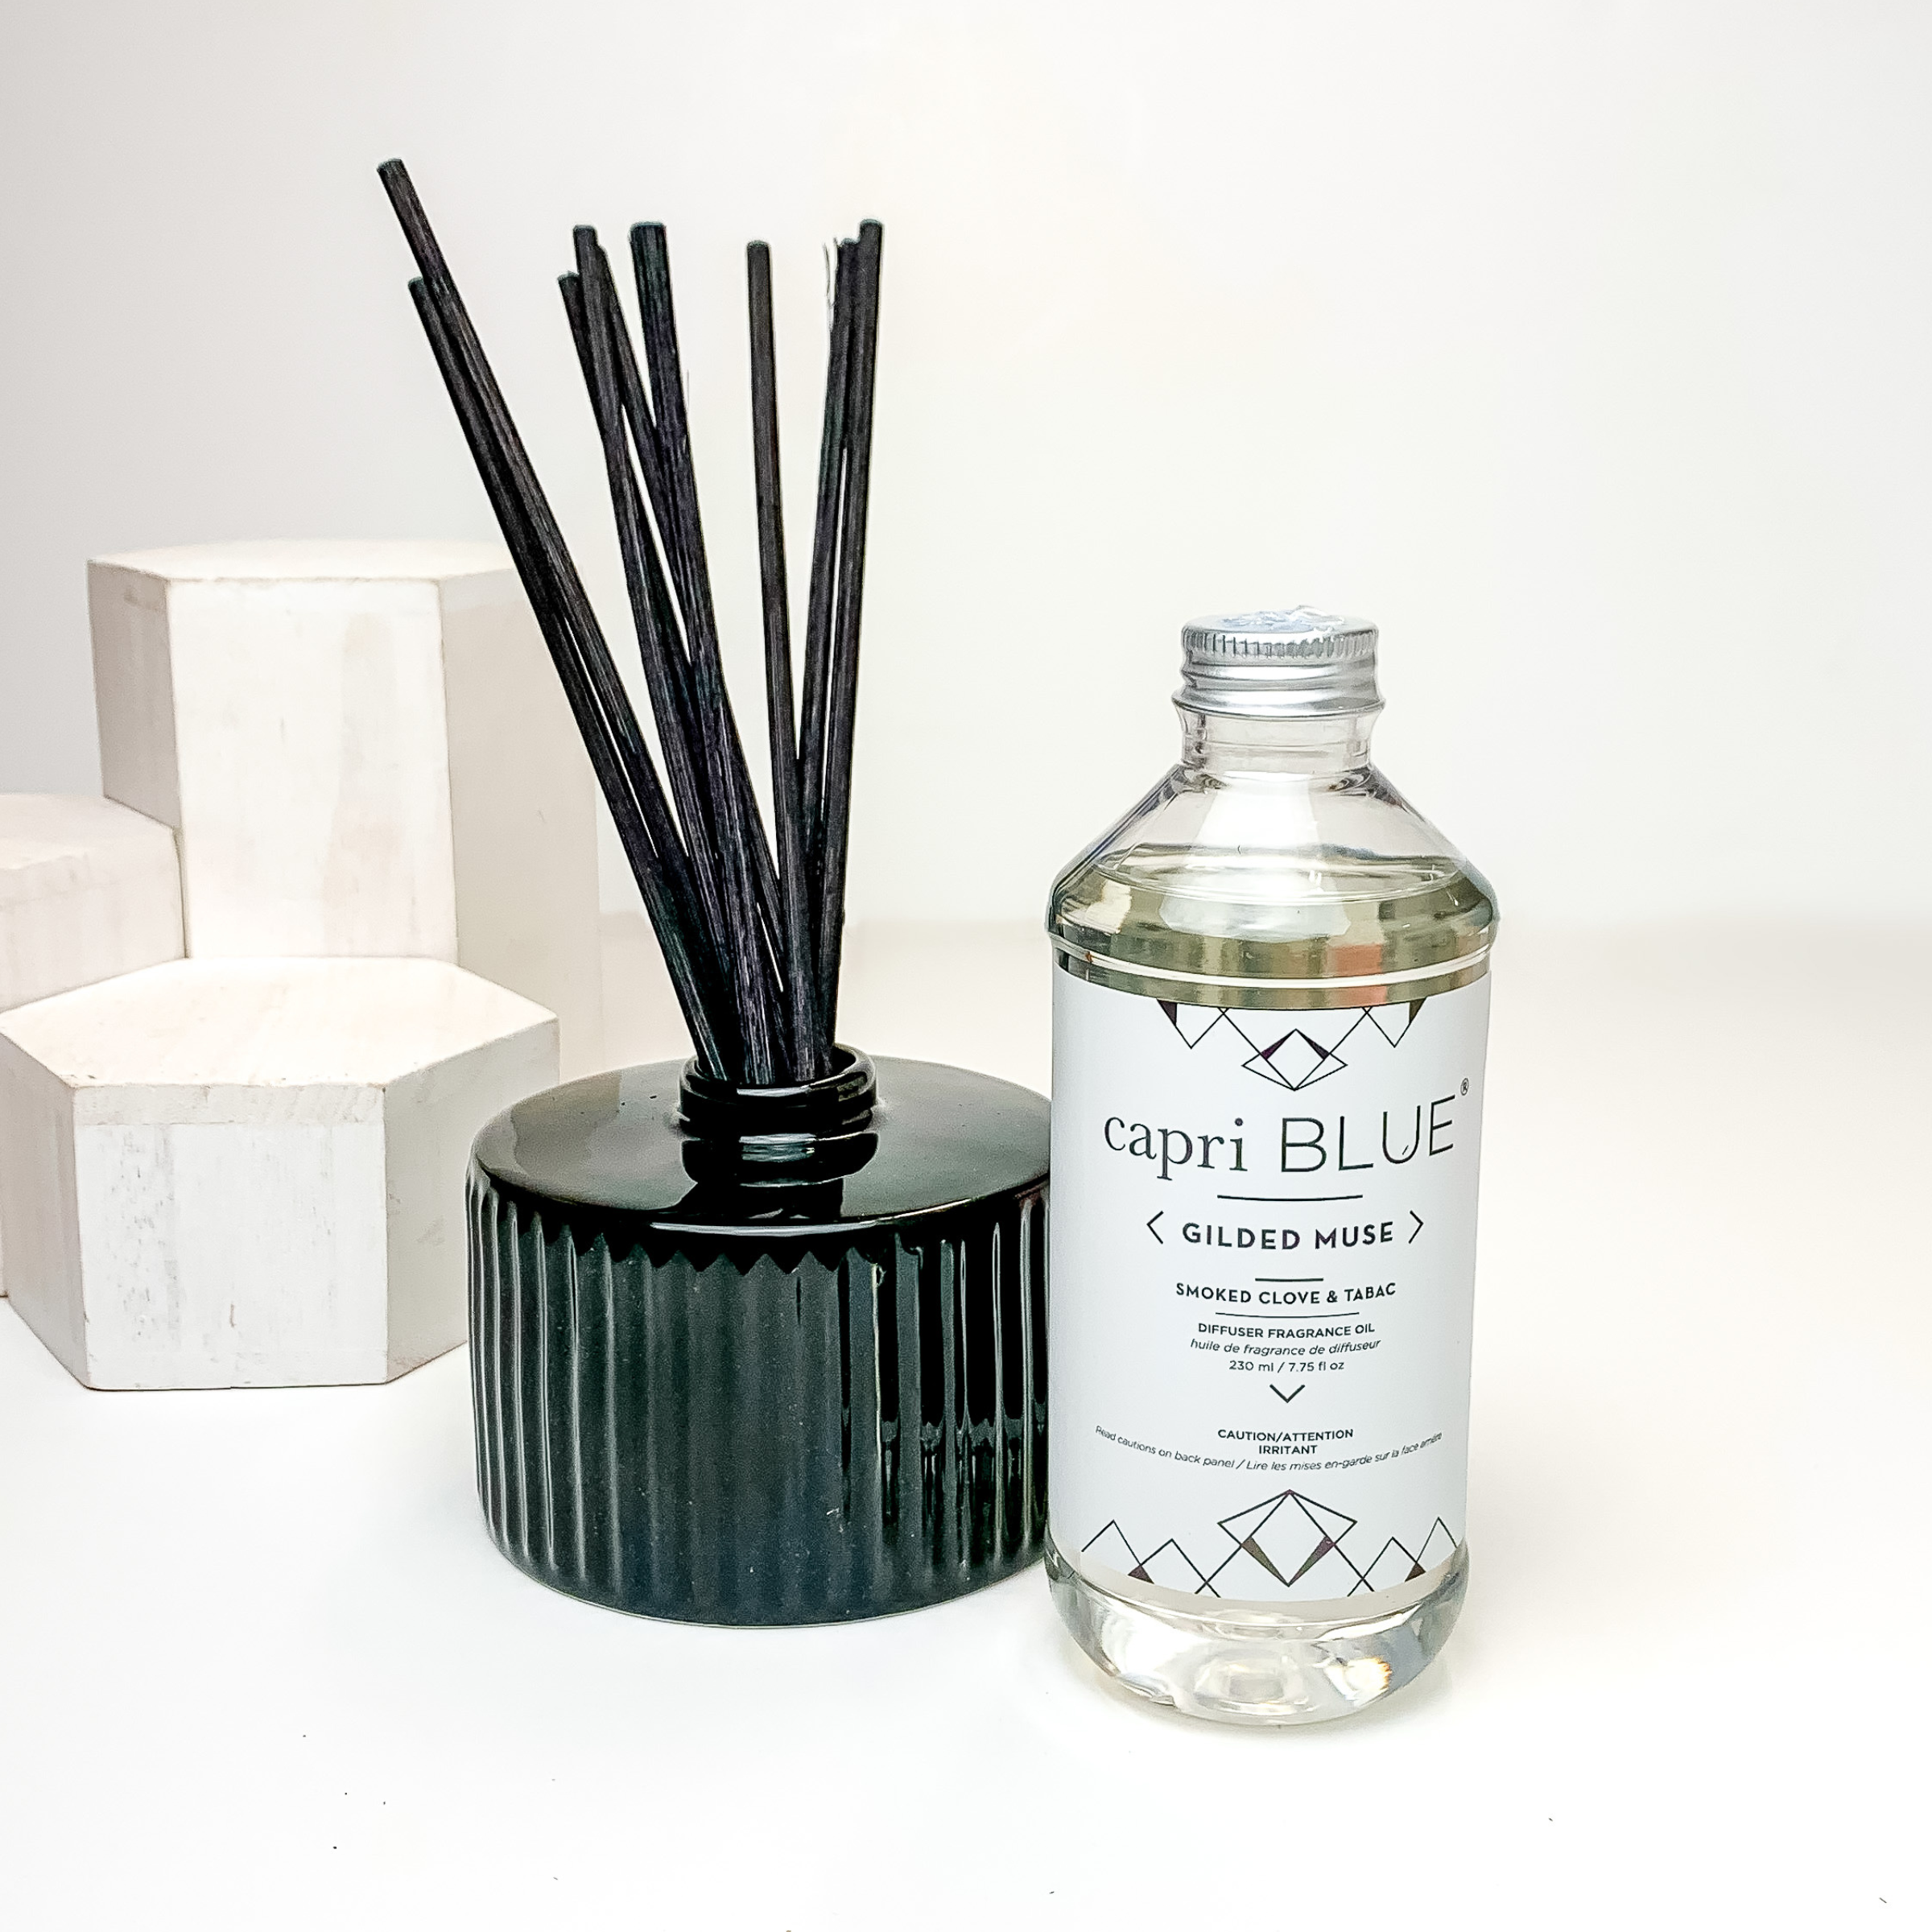 Capri Blue | Black Gilded Fragranced Reed Diffuser |Smoked Clove & Tabac - Giddy Up Glamour Boutique